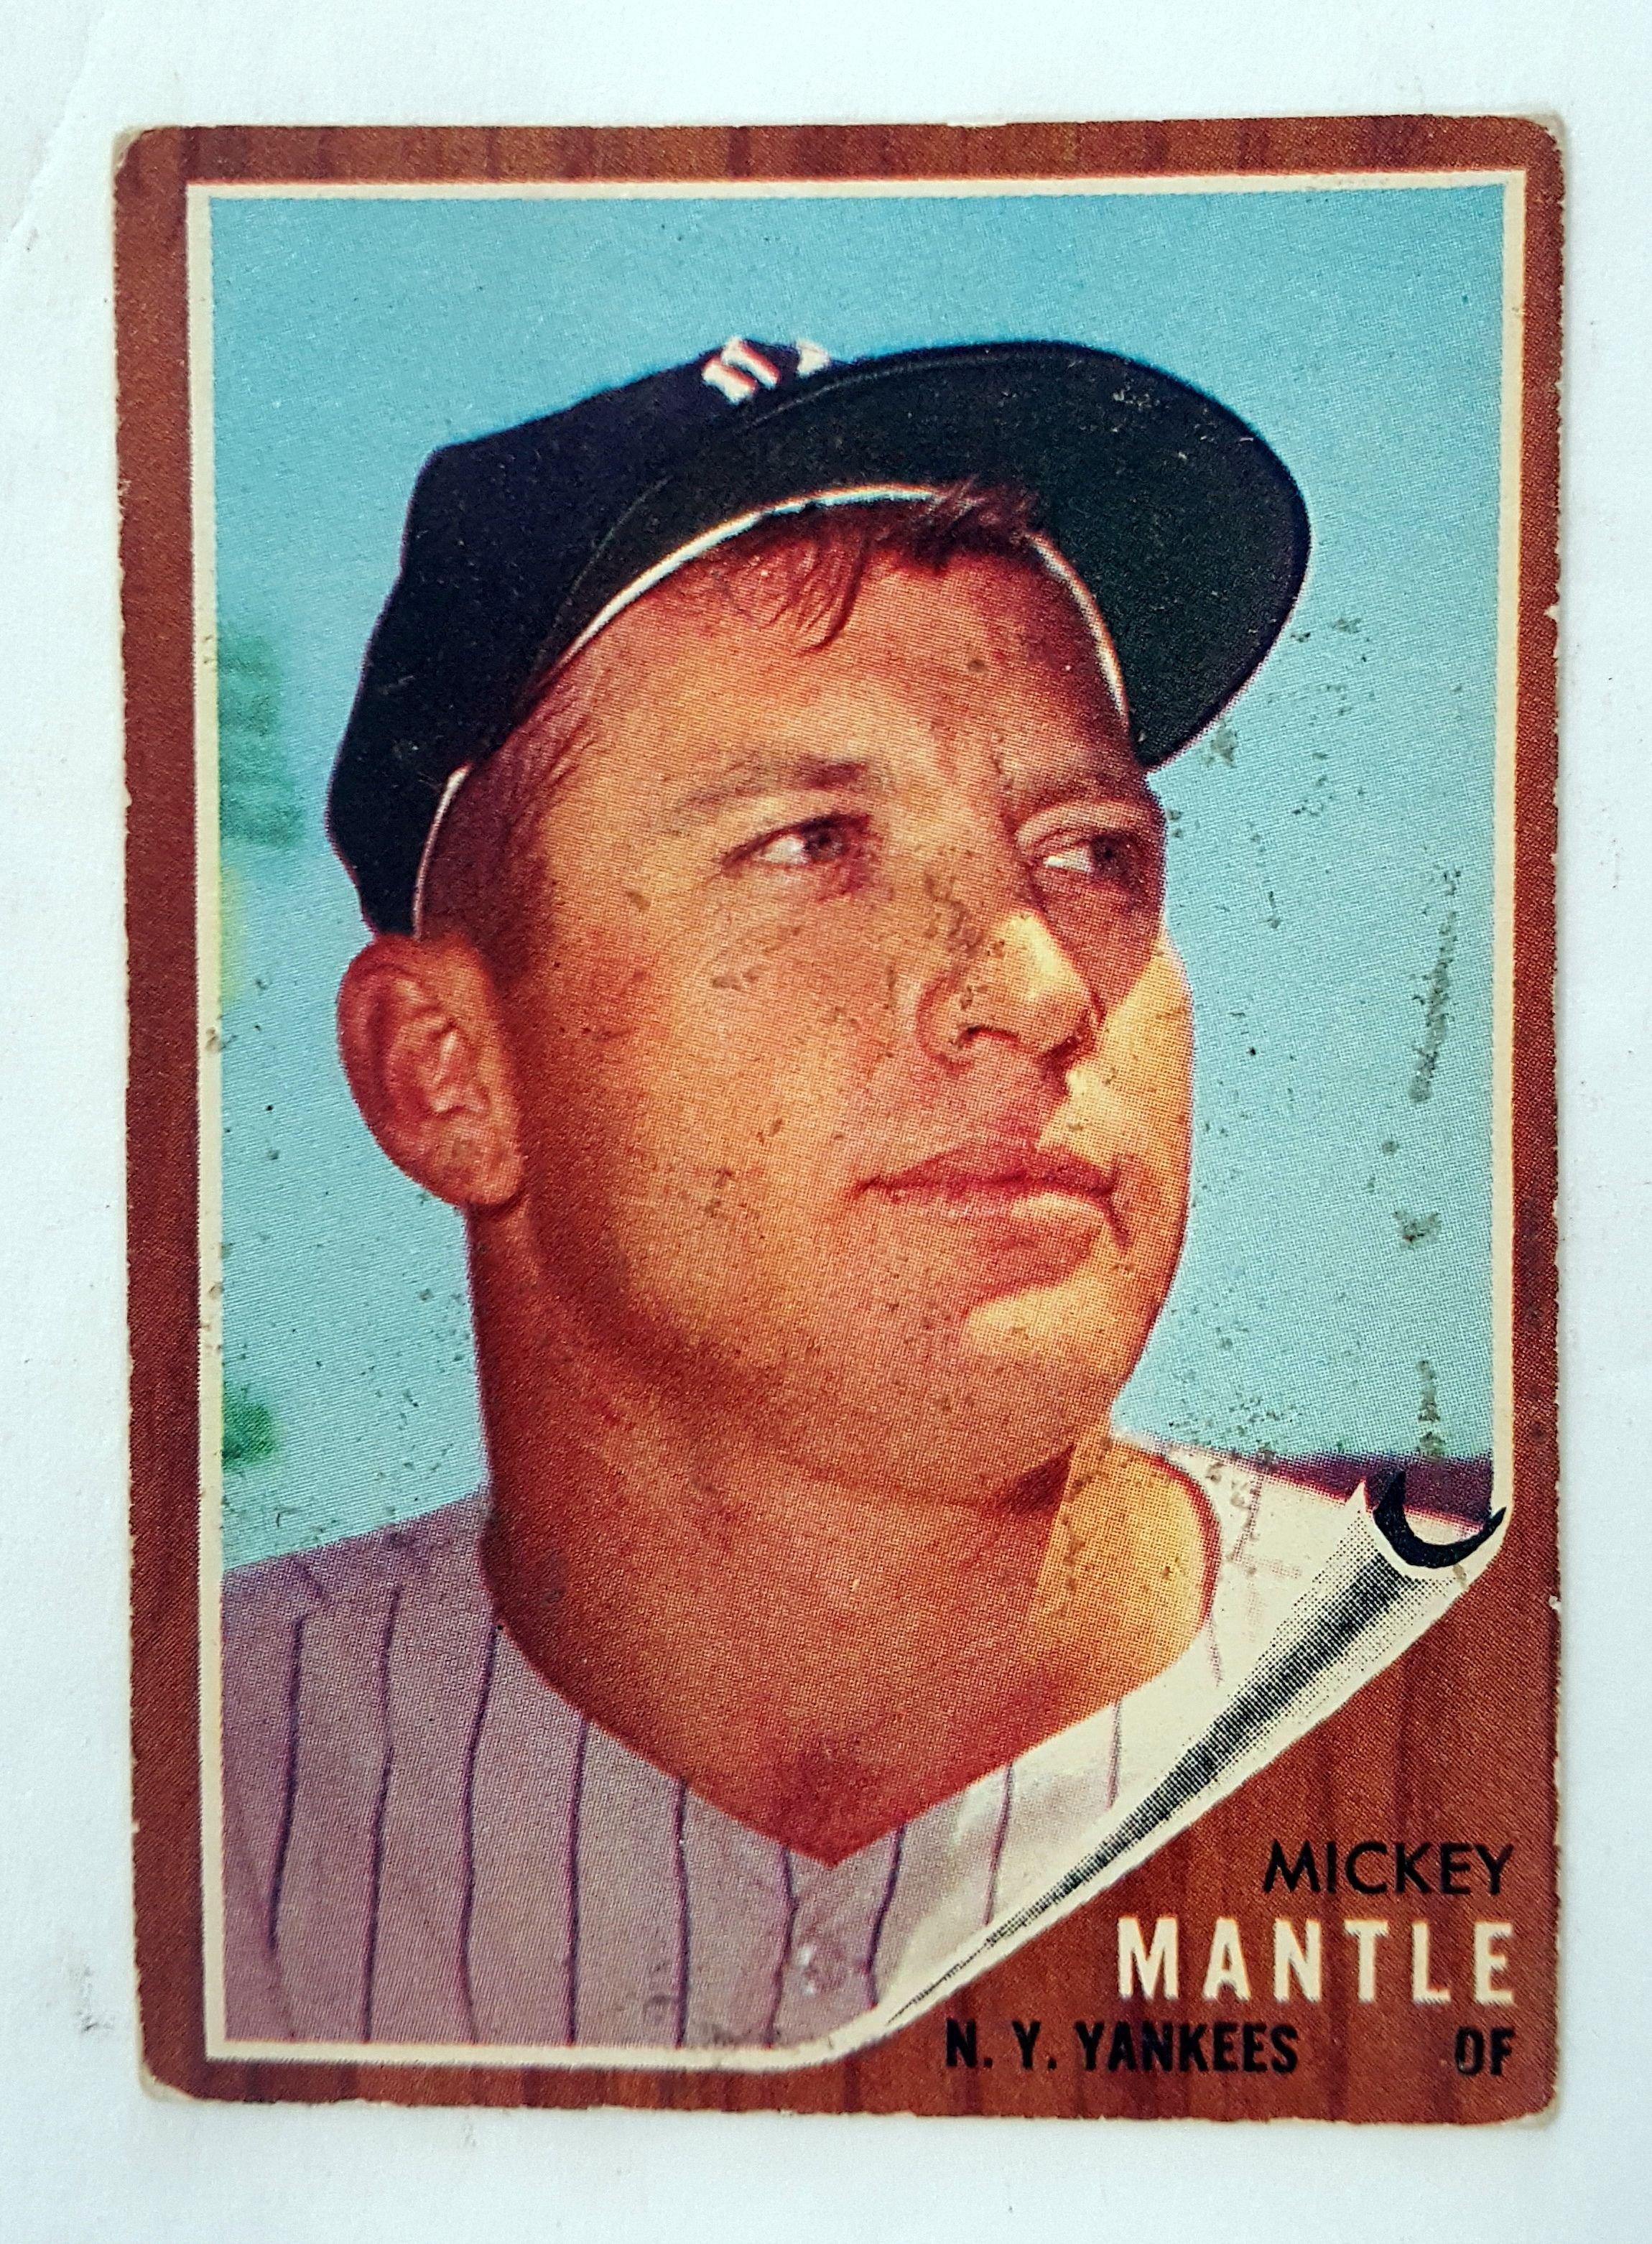 1962 TOPPS MICKEY MANTLE